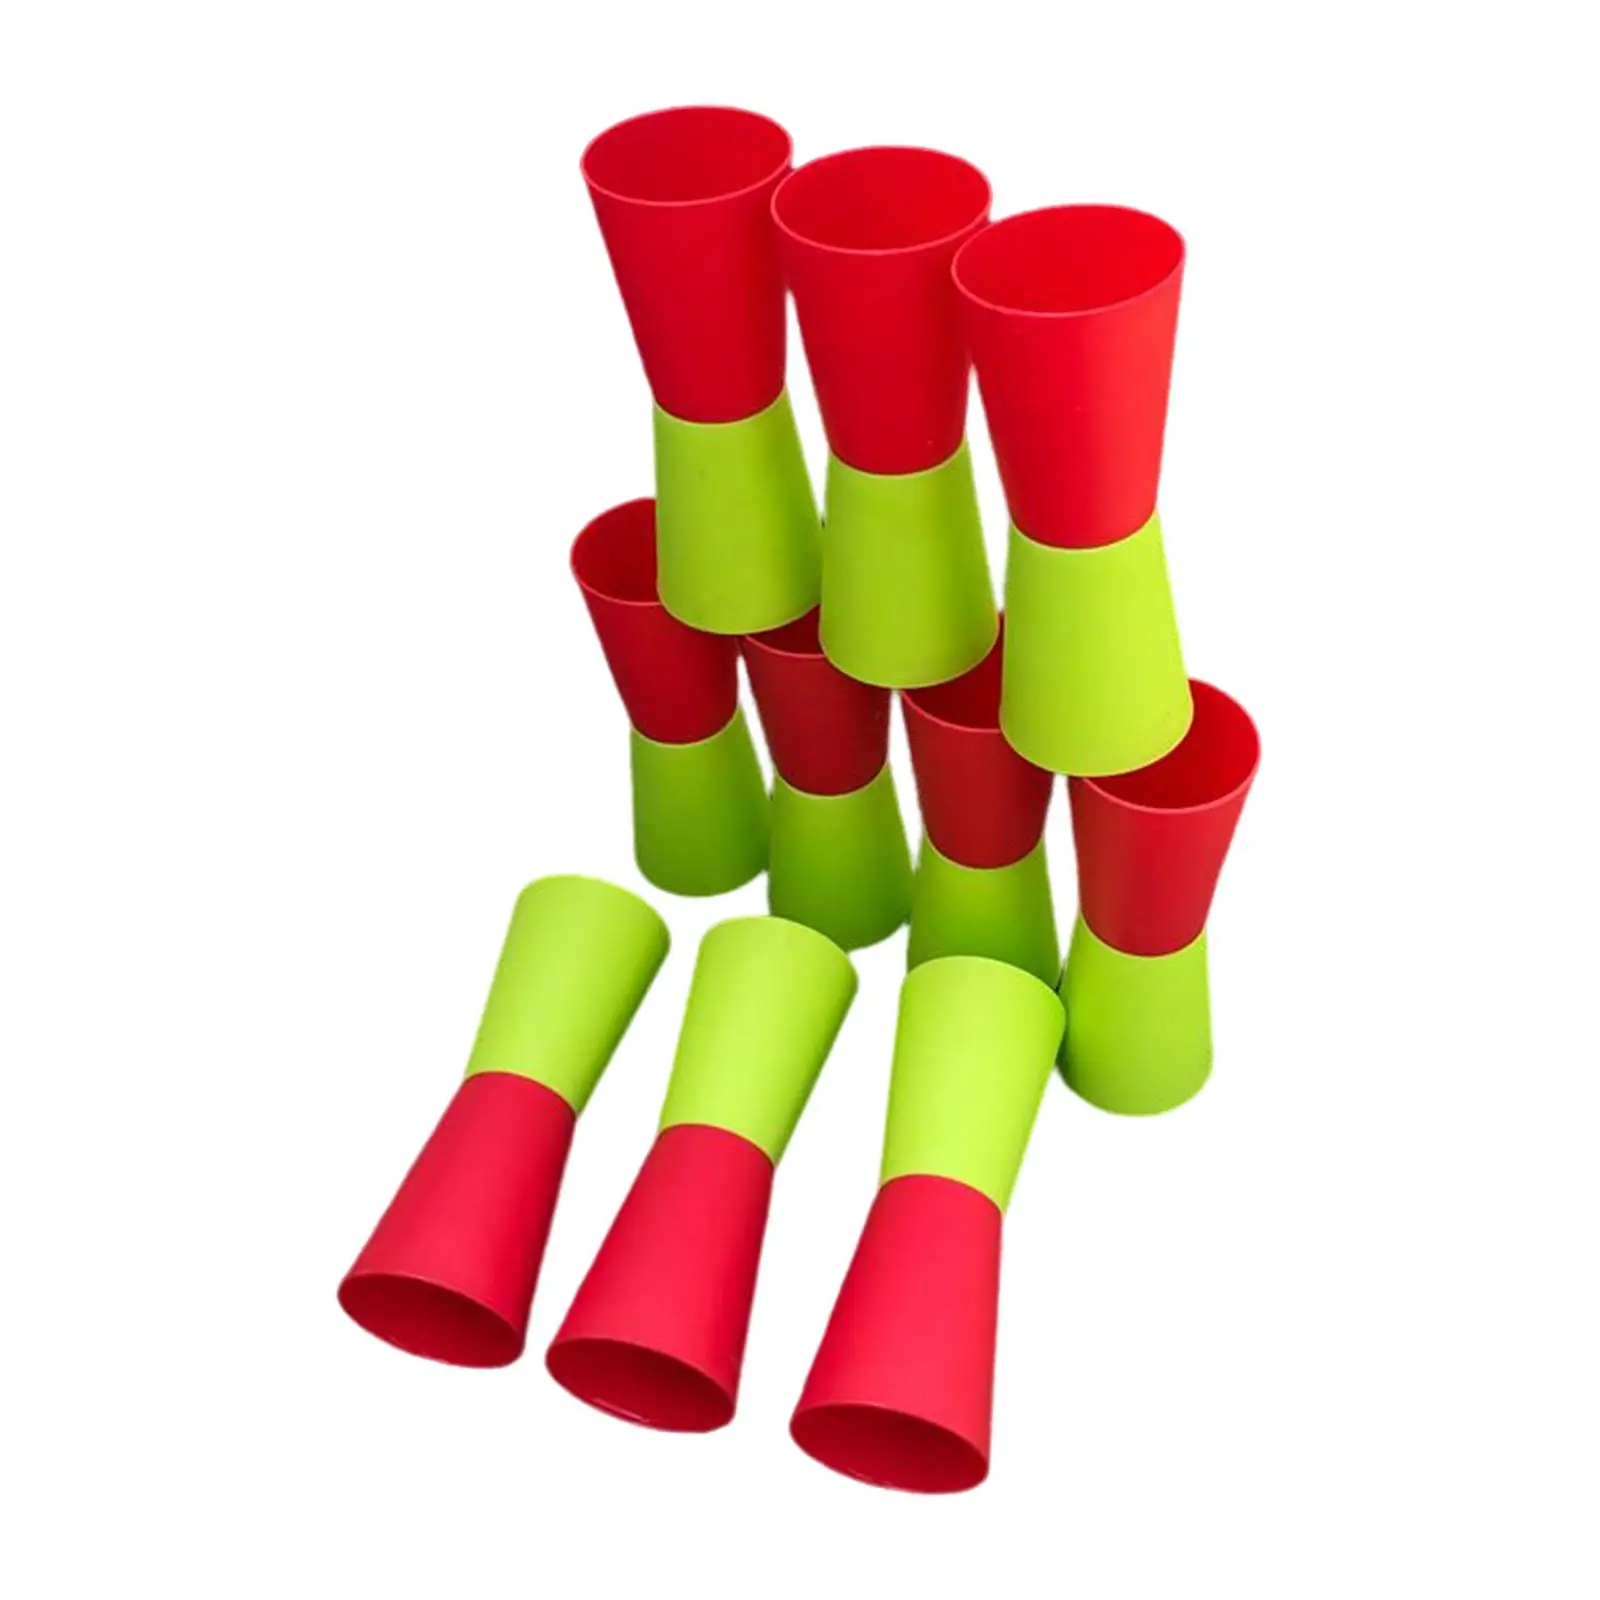 10x Flip Cups Agility Training Fitness Running Exercise Sensory Integration Reversed Cups for Activity Festive Indoor